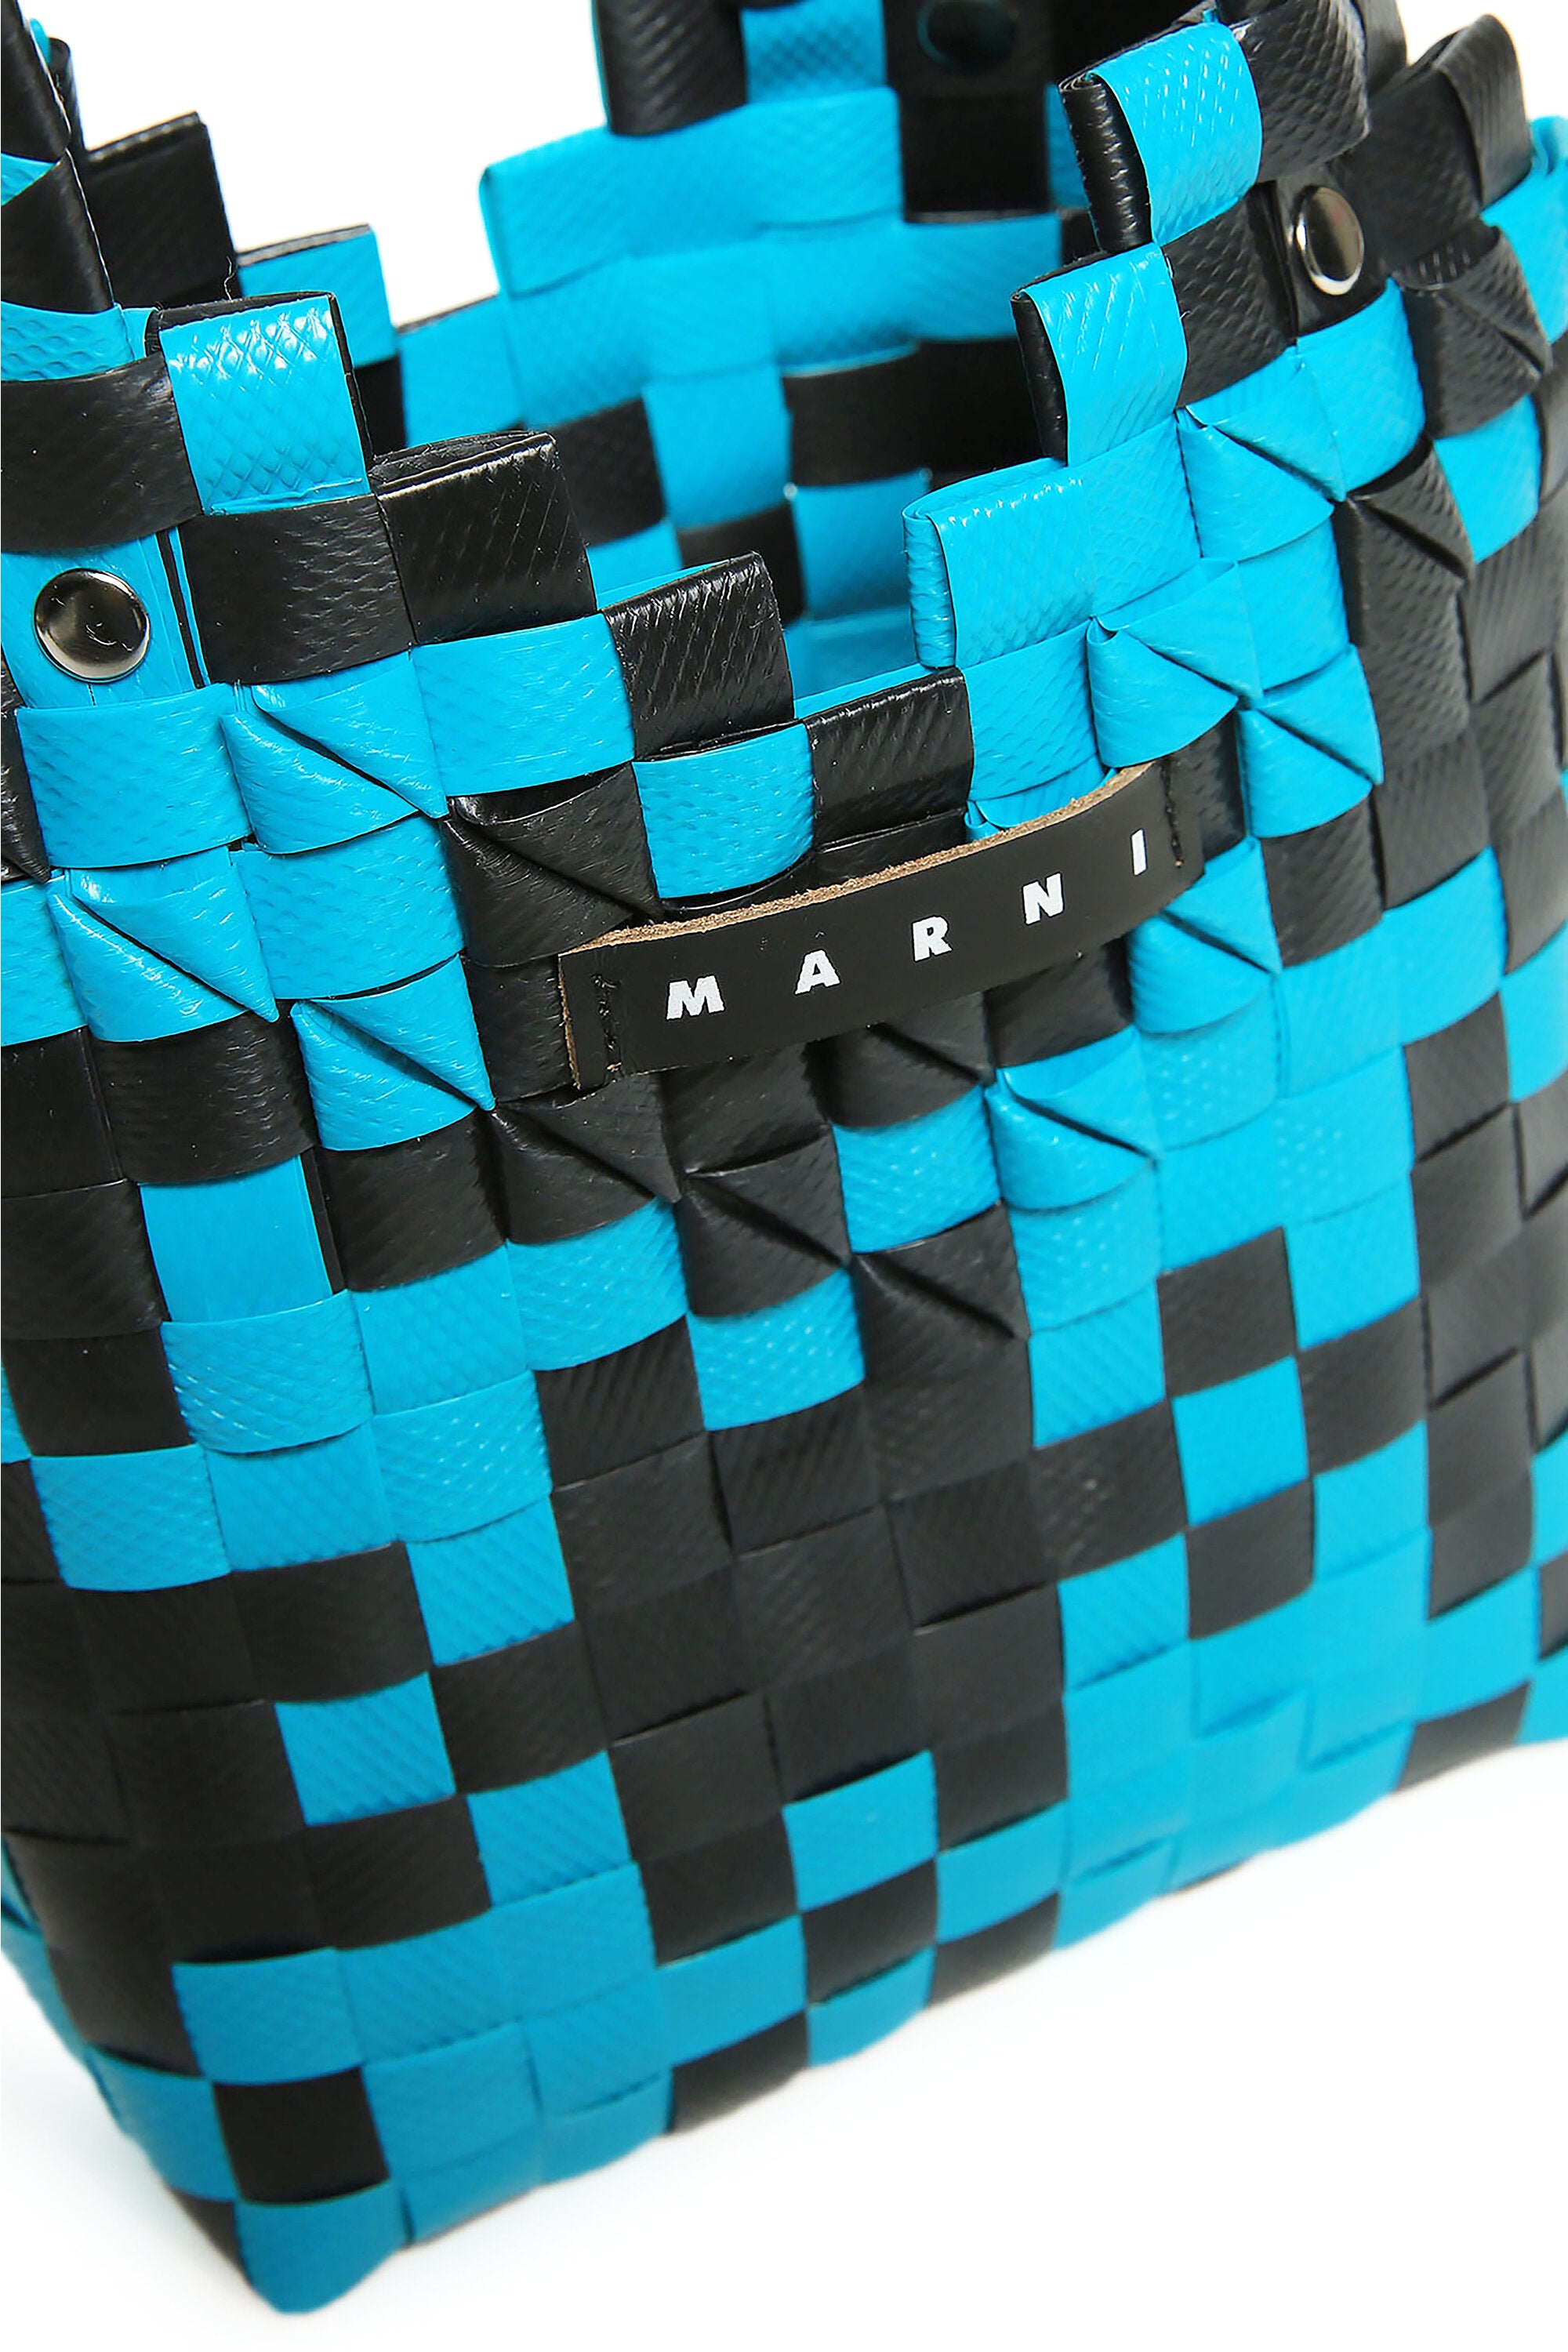 MARNI MARKET JERSEY bag in pink and blue cotton